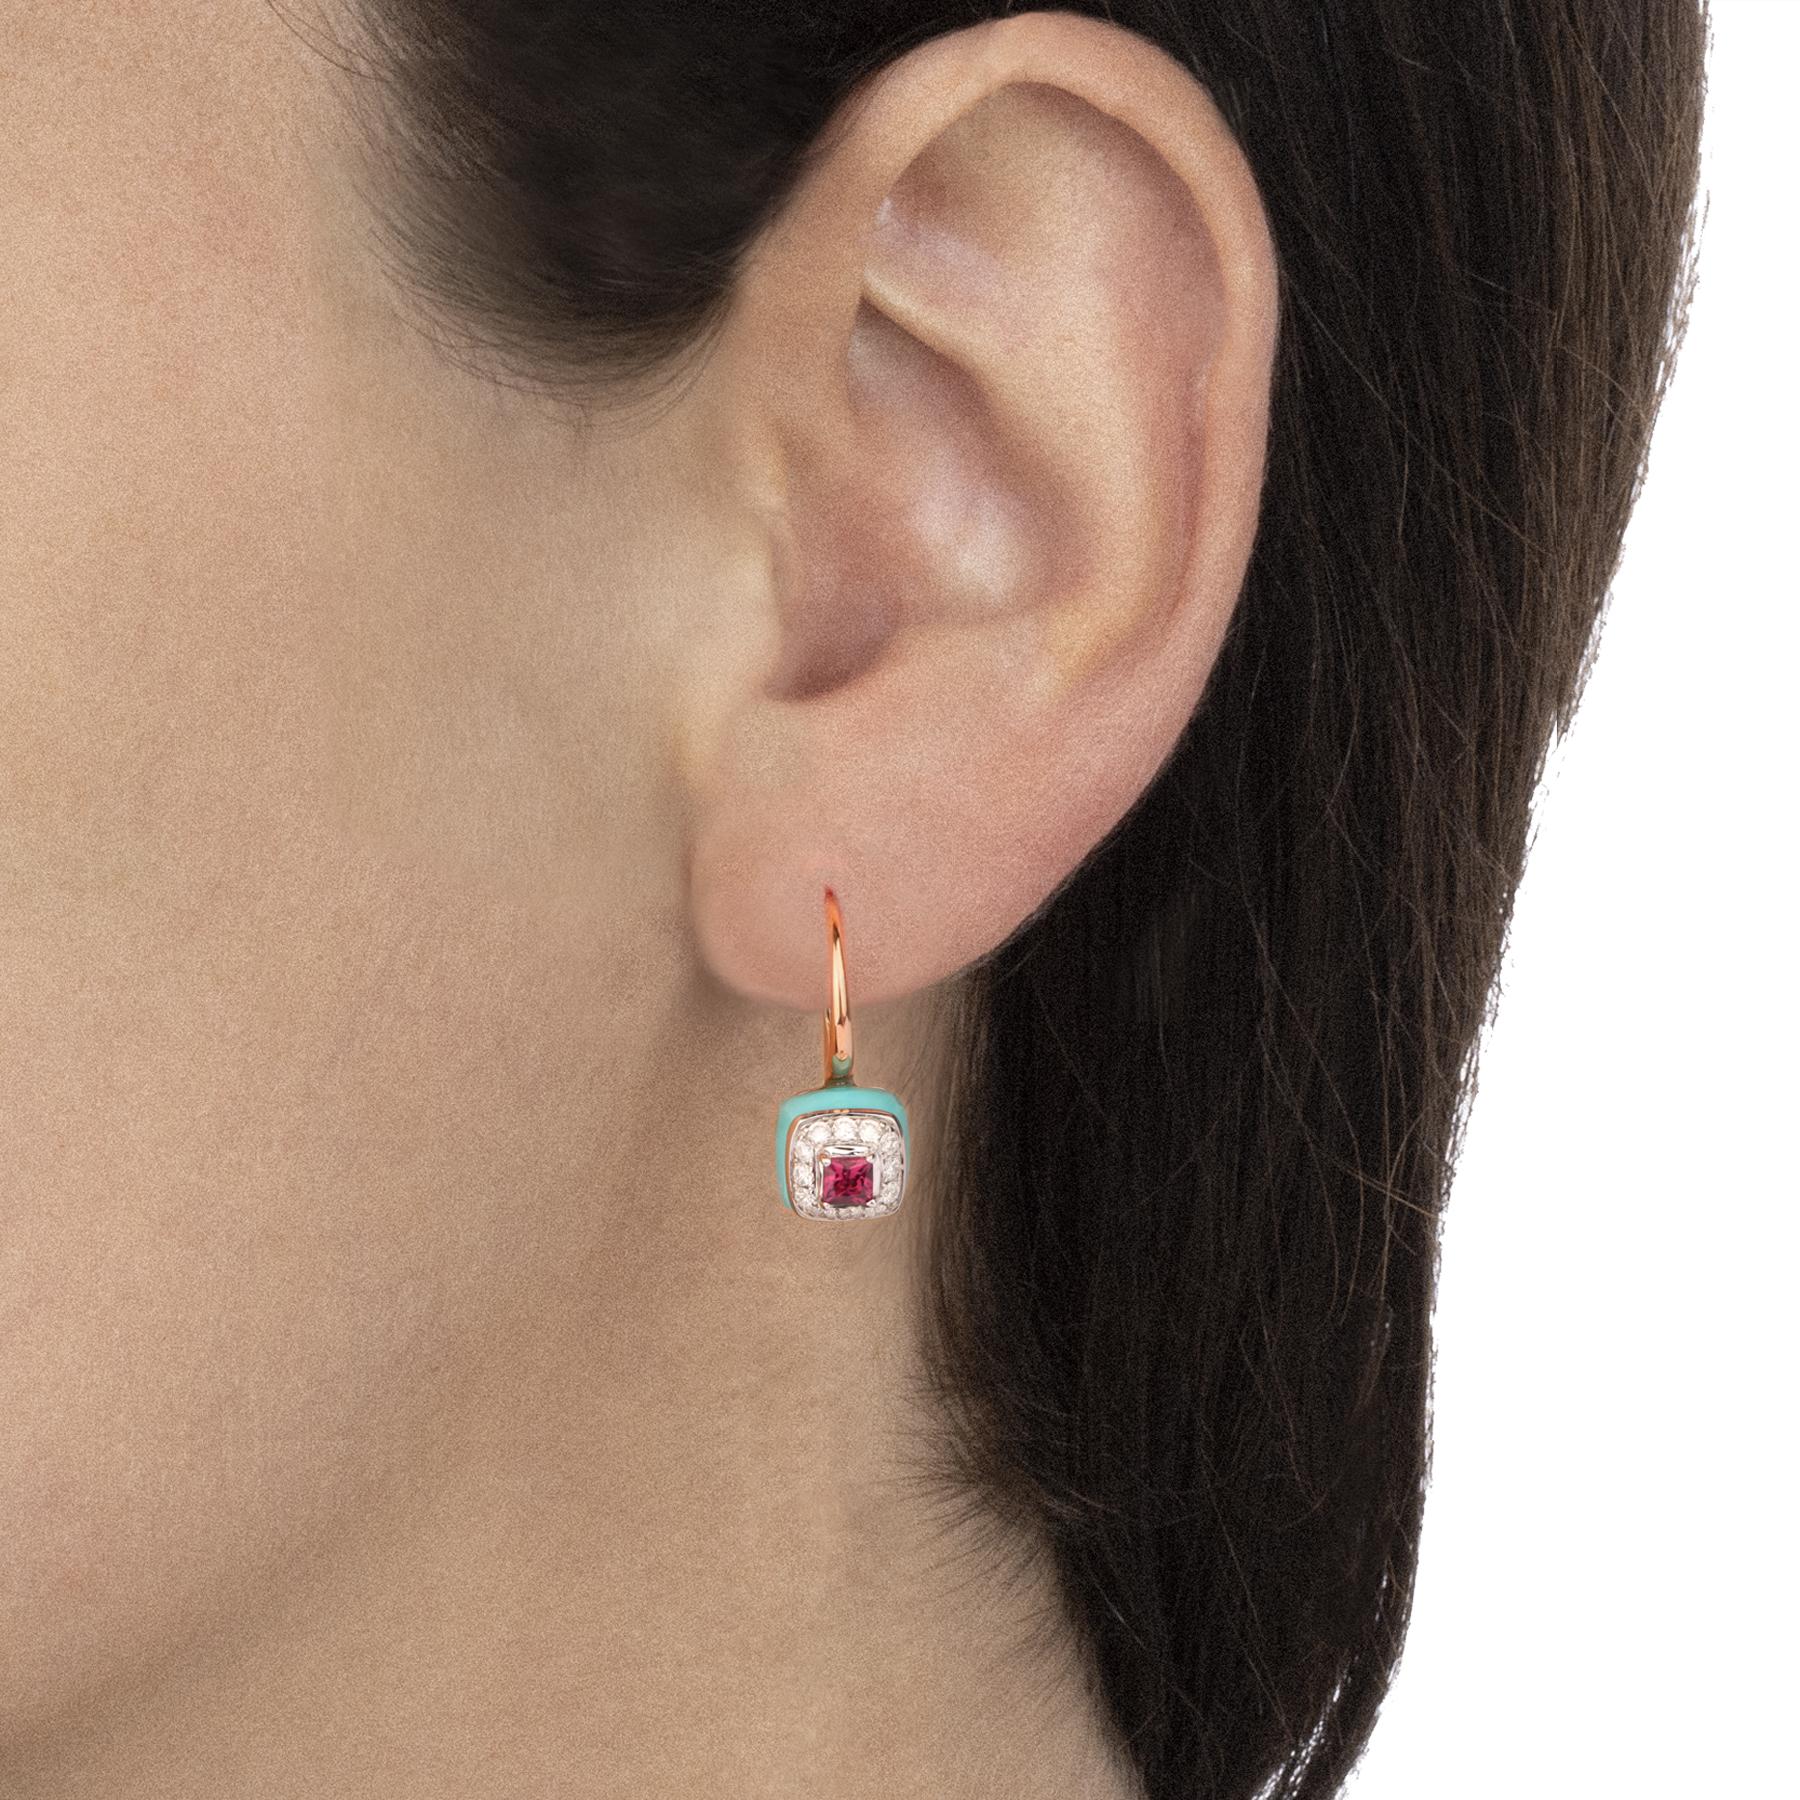 This rose gold earrings preserves chromatic shades with a strong contrast: the purple of the rhodolite and the blue of the turquoise convey to a bright line of diamonds. Refinement and playful design for a unique jewel.

Cast rose gold earrings,